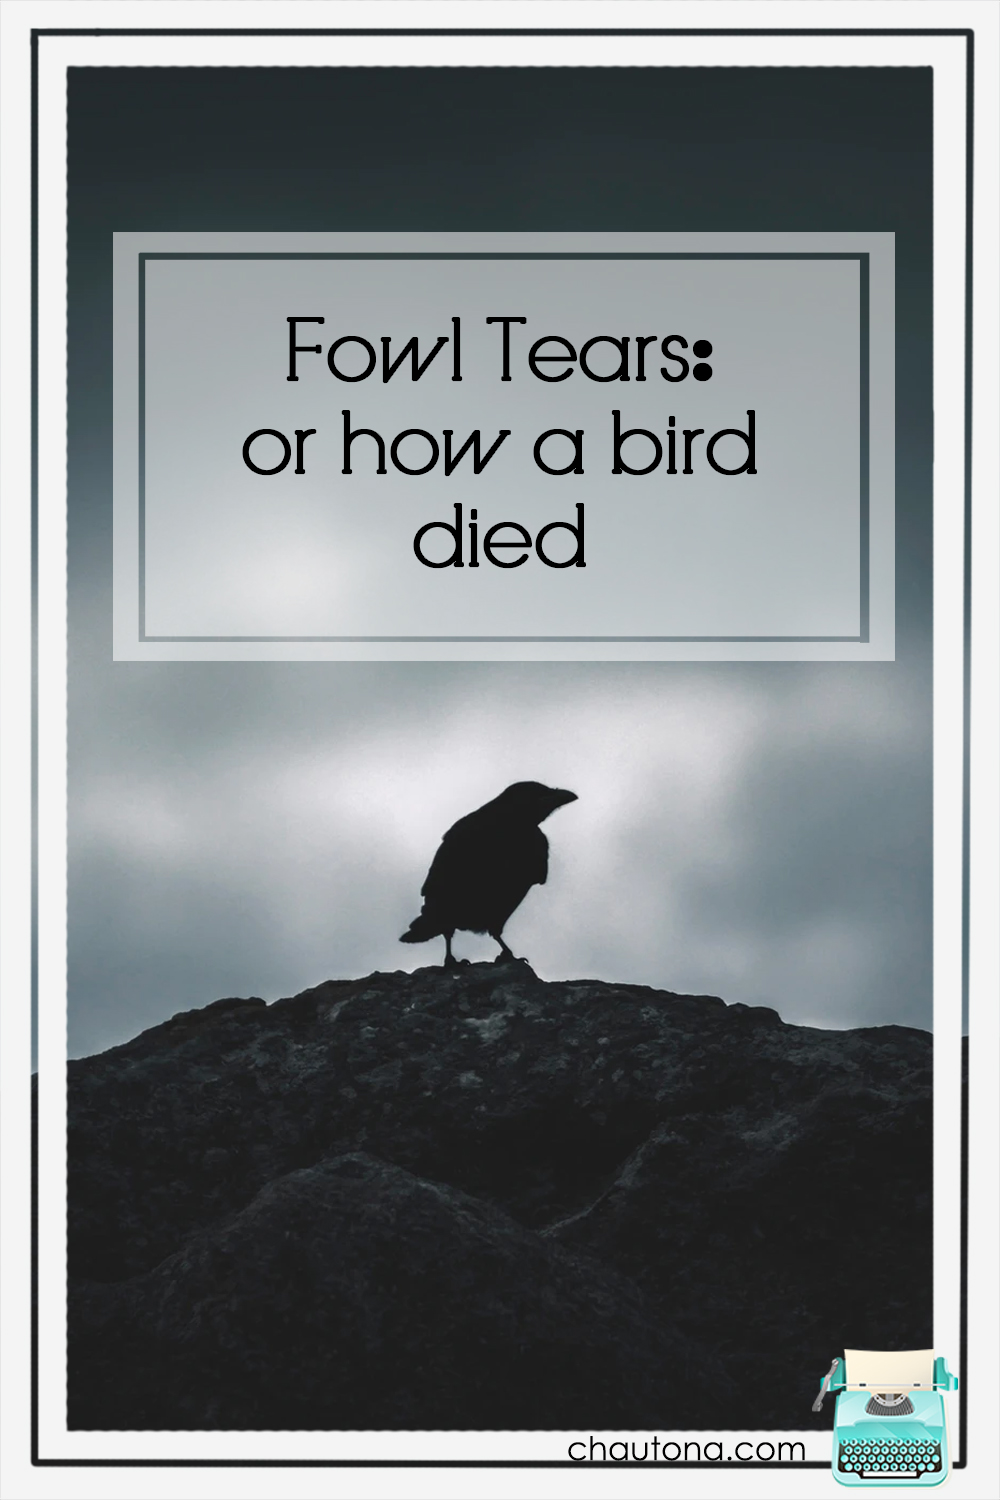 Fowl tears: or how a bird died world changed